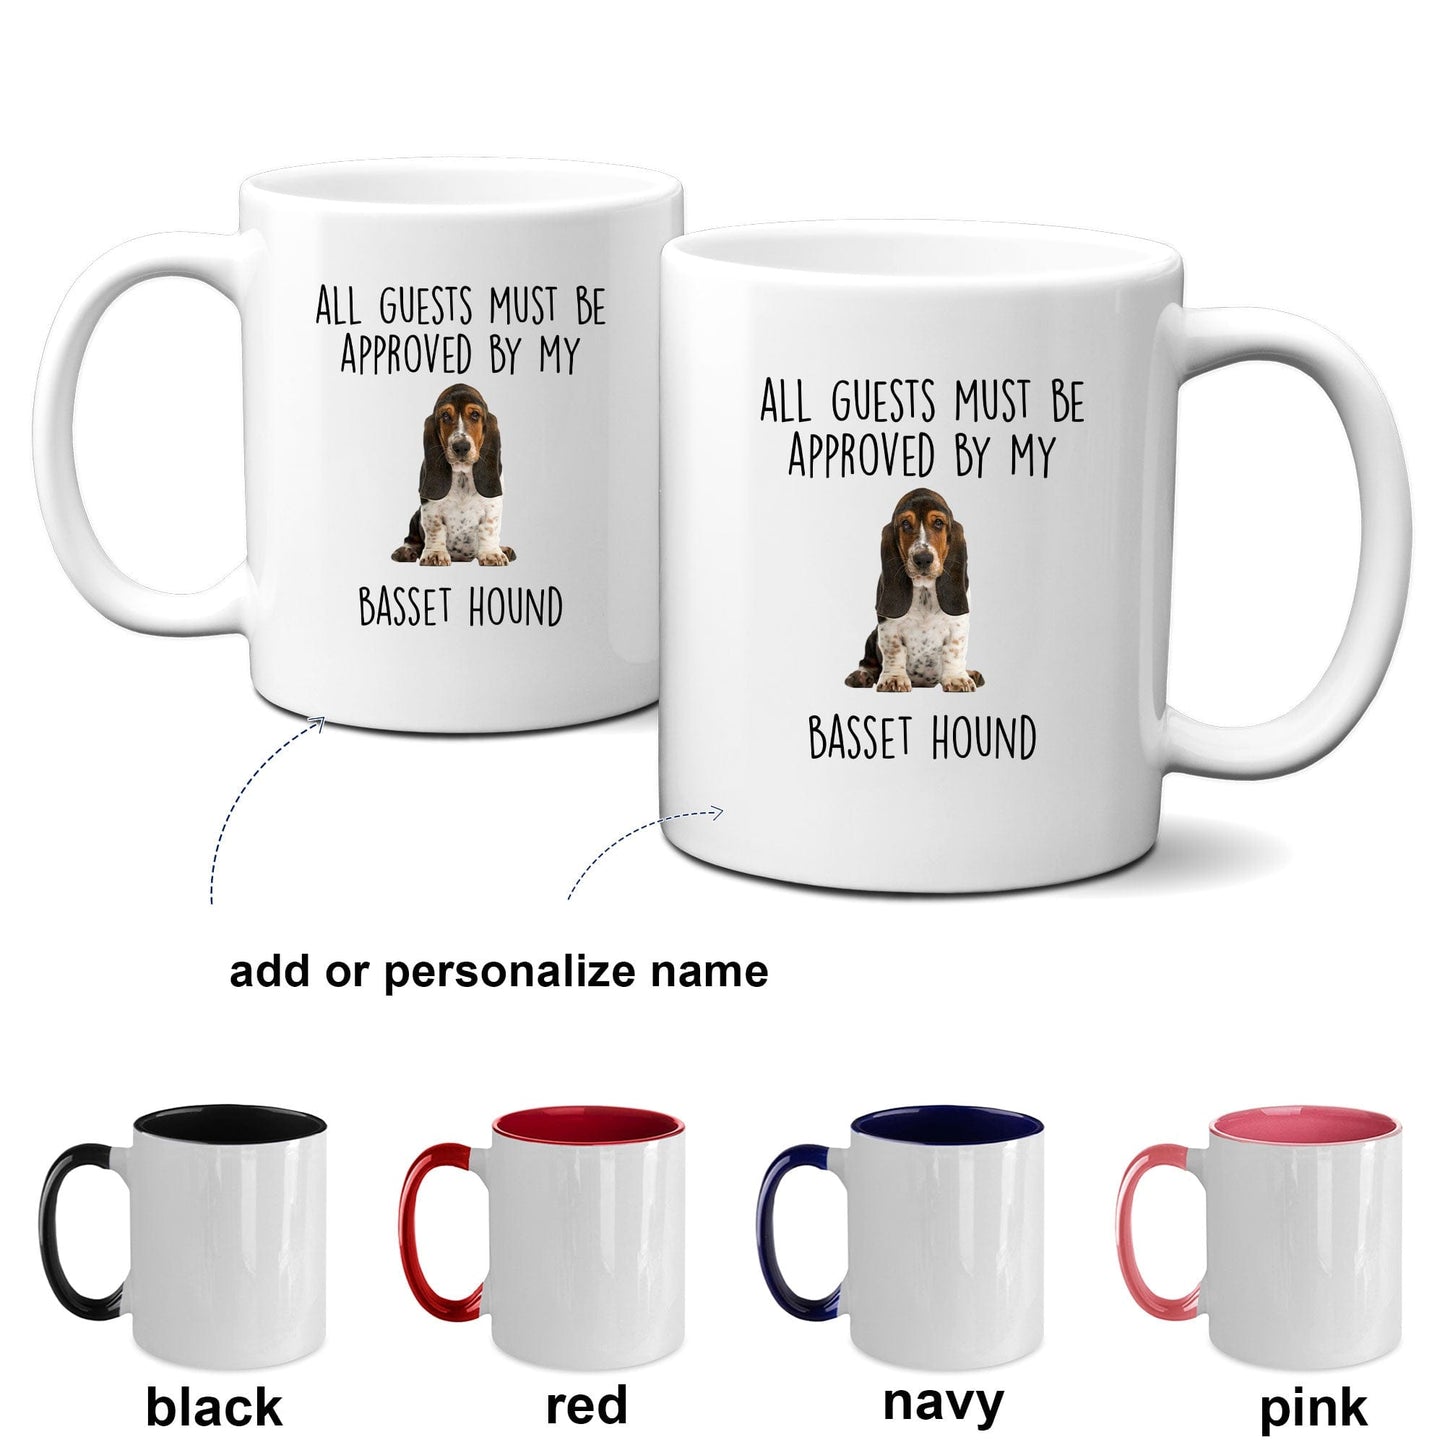 Funny Basset Hound Dog Custom Ceramic Coffee Mug - Guests Must be Approved